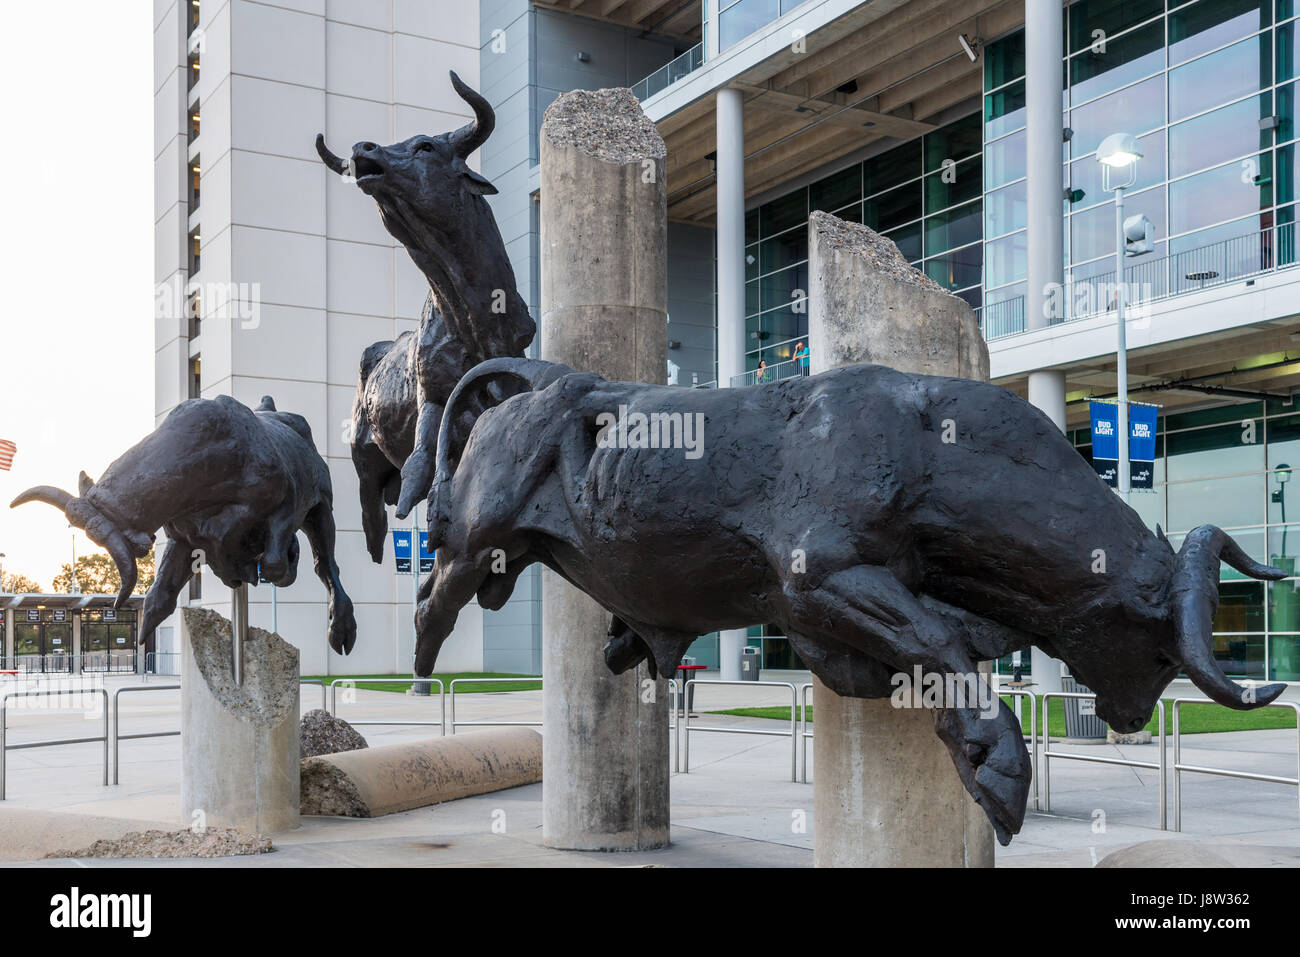 The Running Bulls sculptures in front of the NRG Stadium, Houston, Texas, USA. Stock Photo